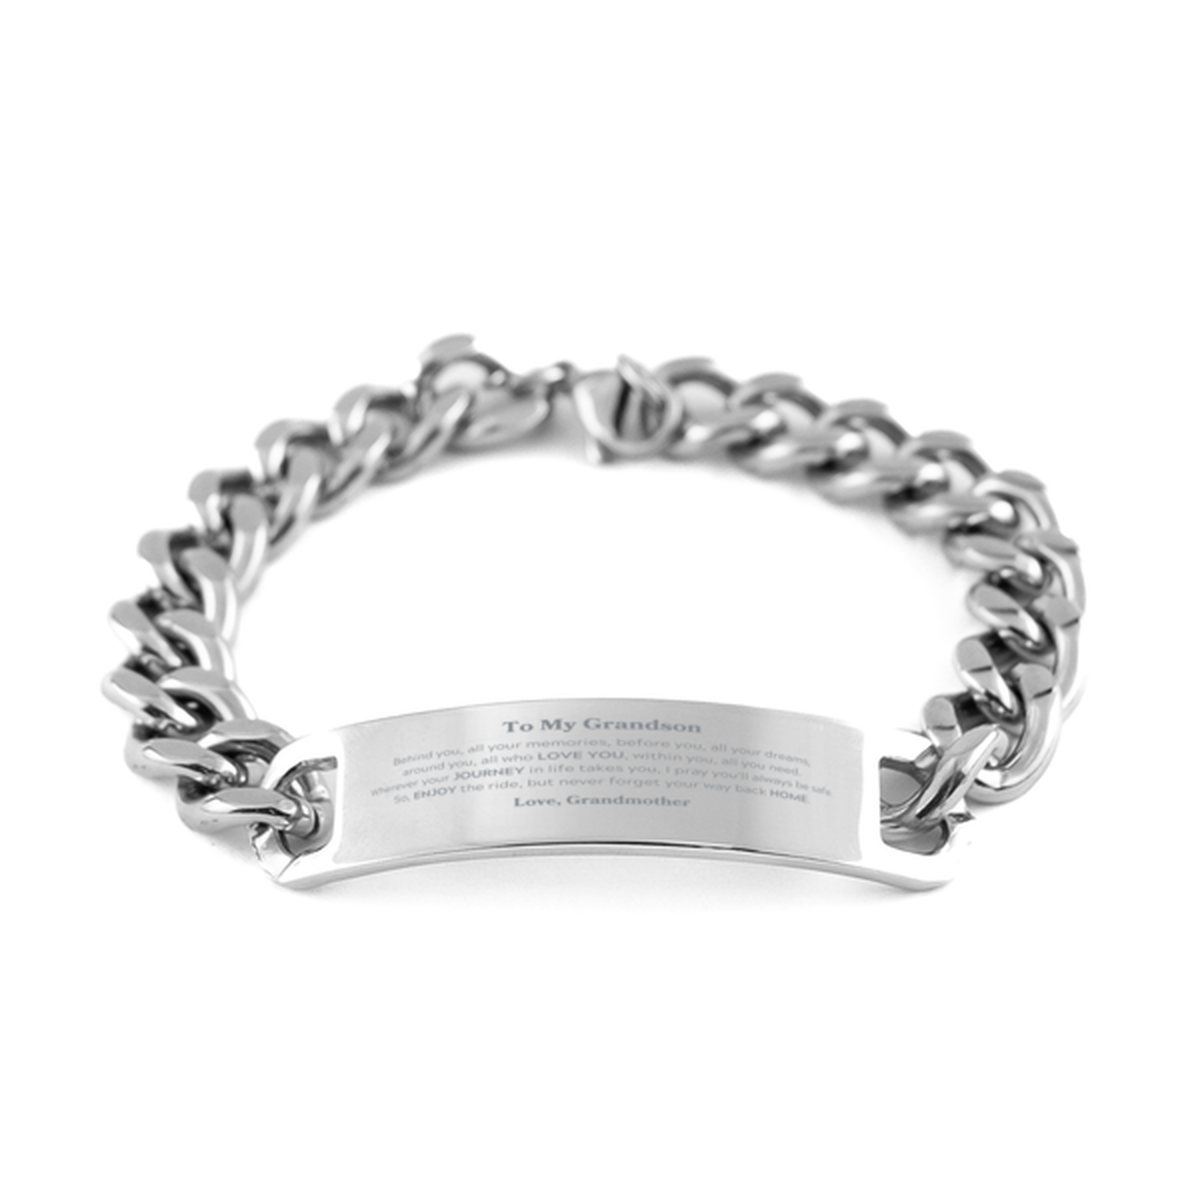 To My Grandson Graduation Gifts from Grandmother, Grandson Cuban Chain Stainless Steel Bracelet Christmas Birthday Gifts for Grandson Behind you, all your memories, before you, all your dreams. Love, Grandmother